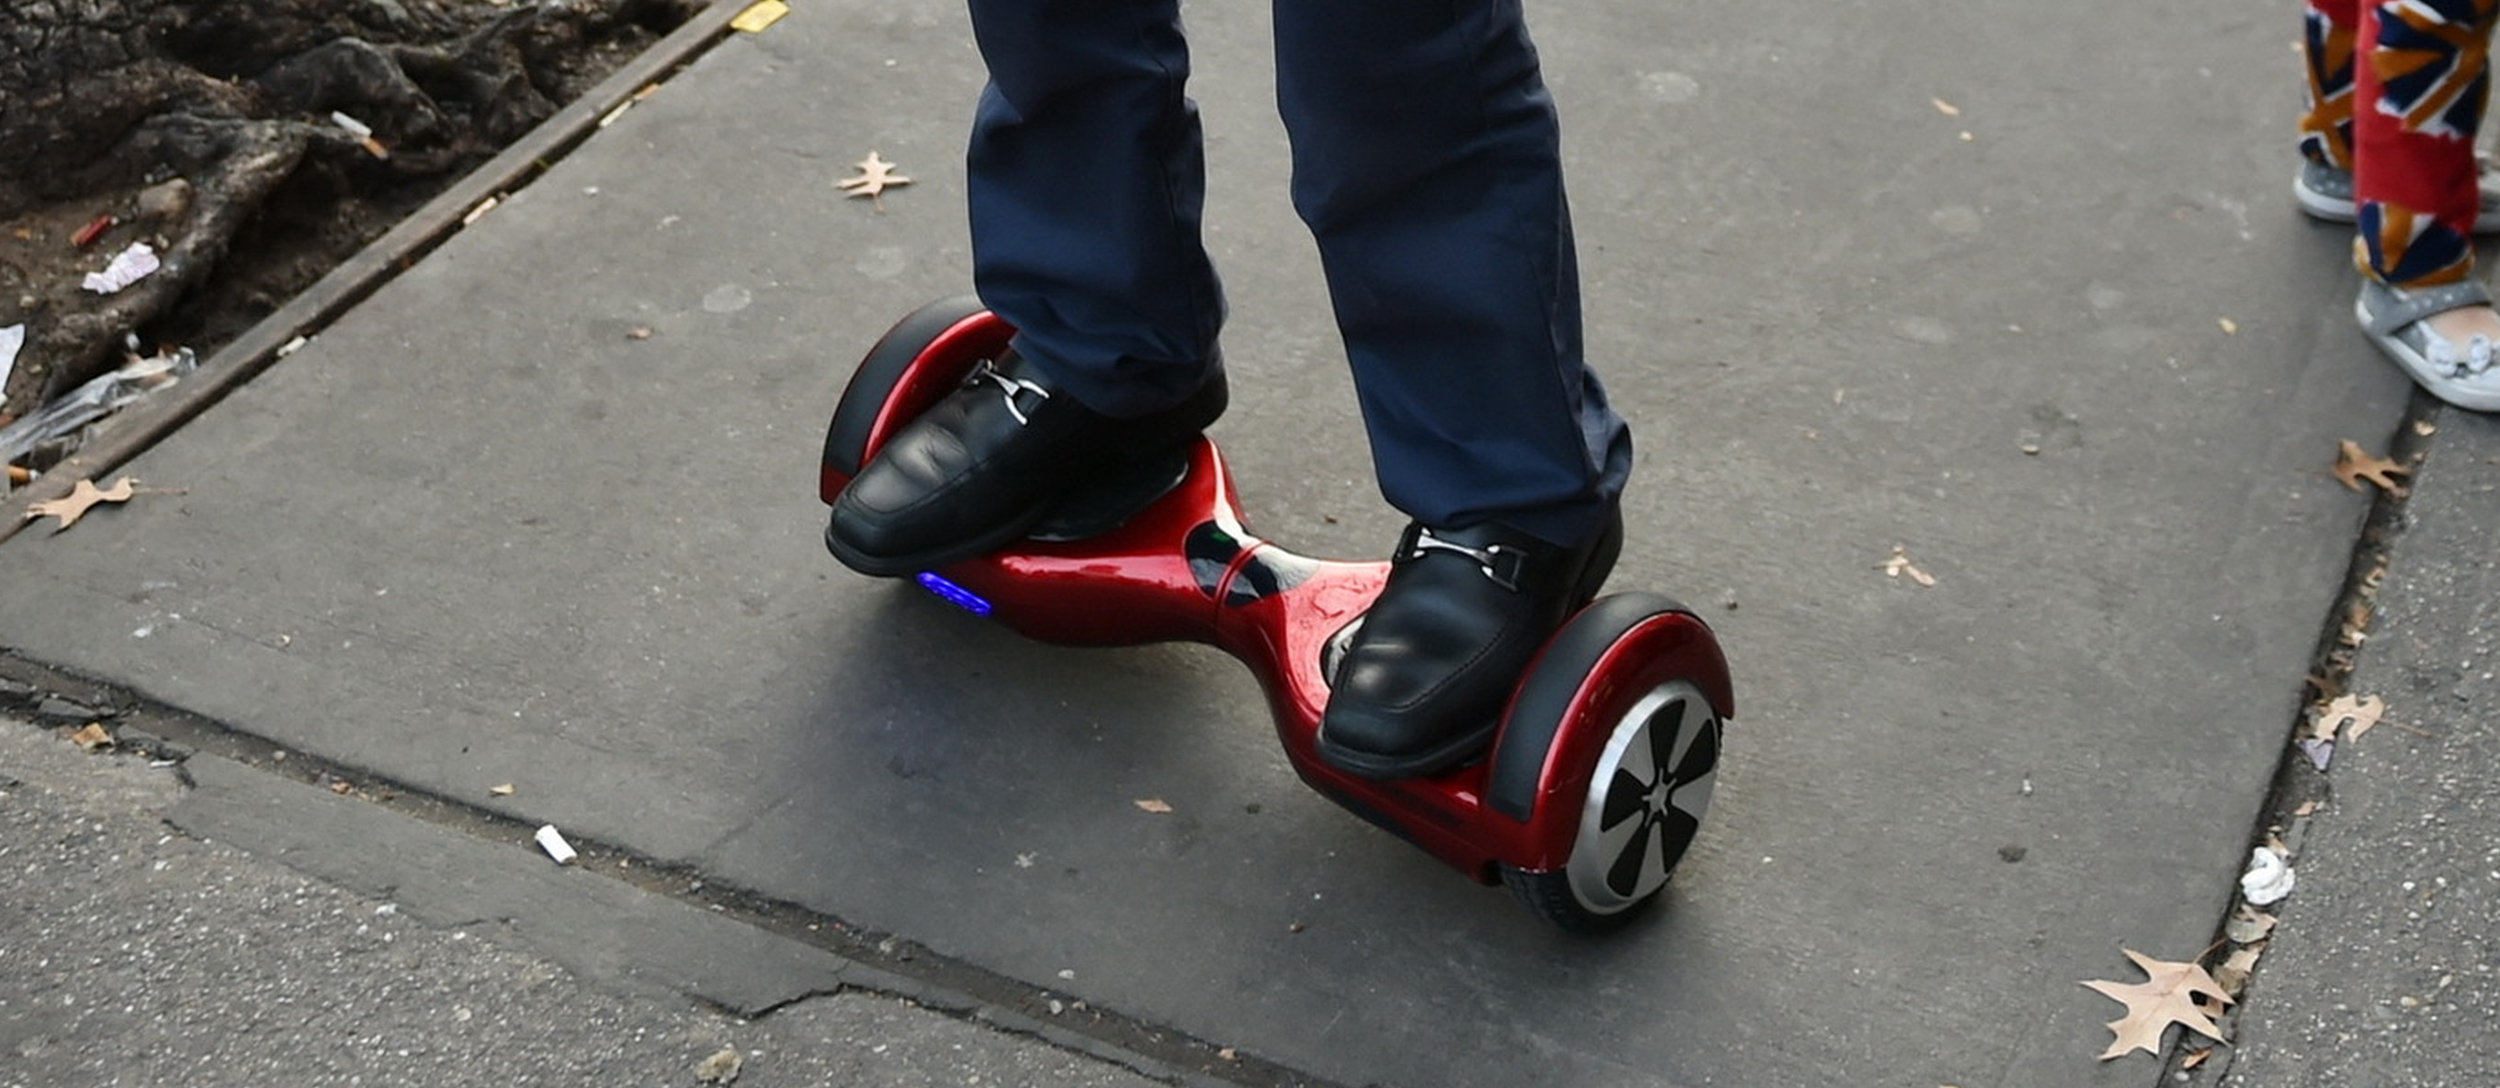 Hoverboard Buying Guide: Everything You Need to Know | Tom's Guide